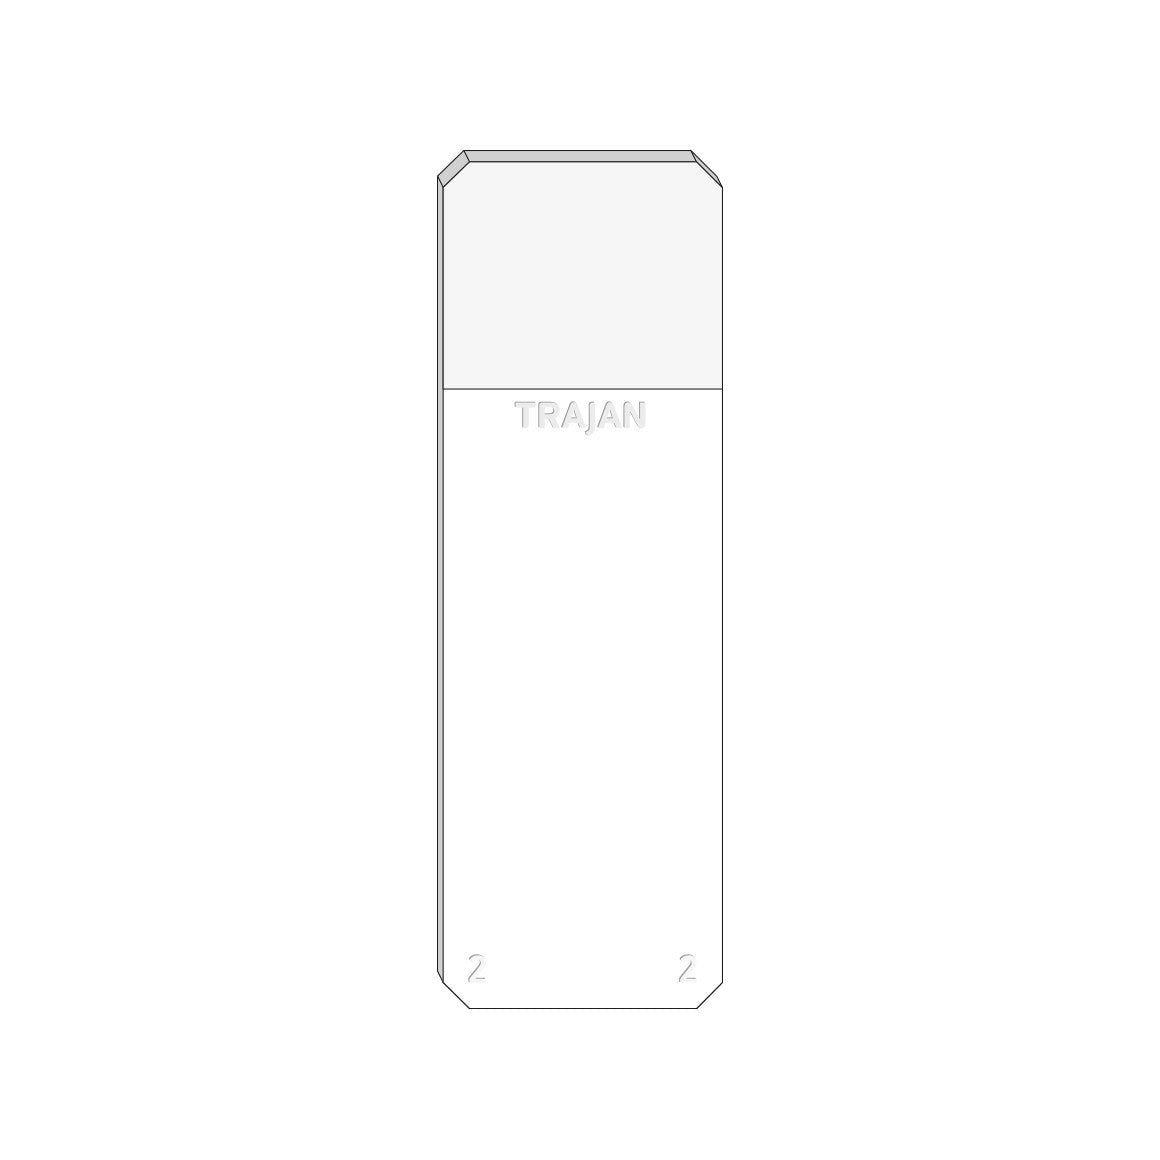 Trajan Scientific and Medical, Series 2 Adhesive Microscope Slides, White, Frost 20 mm, 75 mm x 25 mm